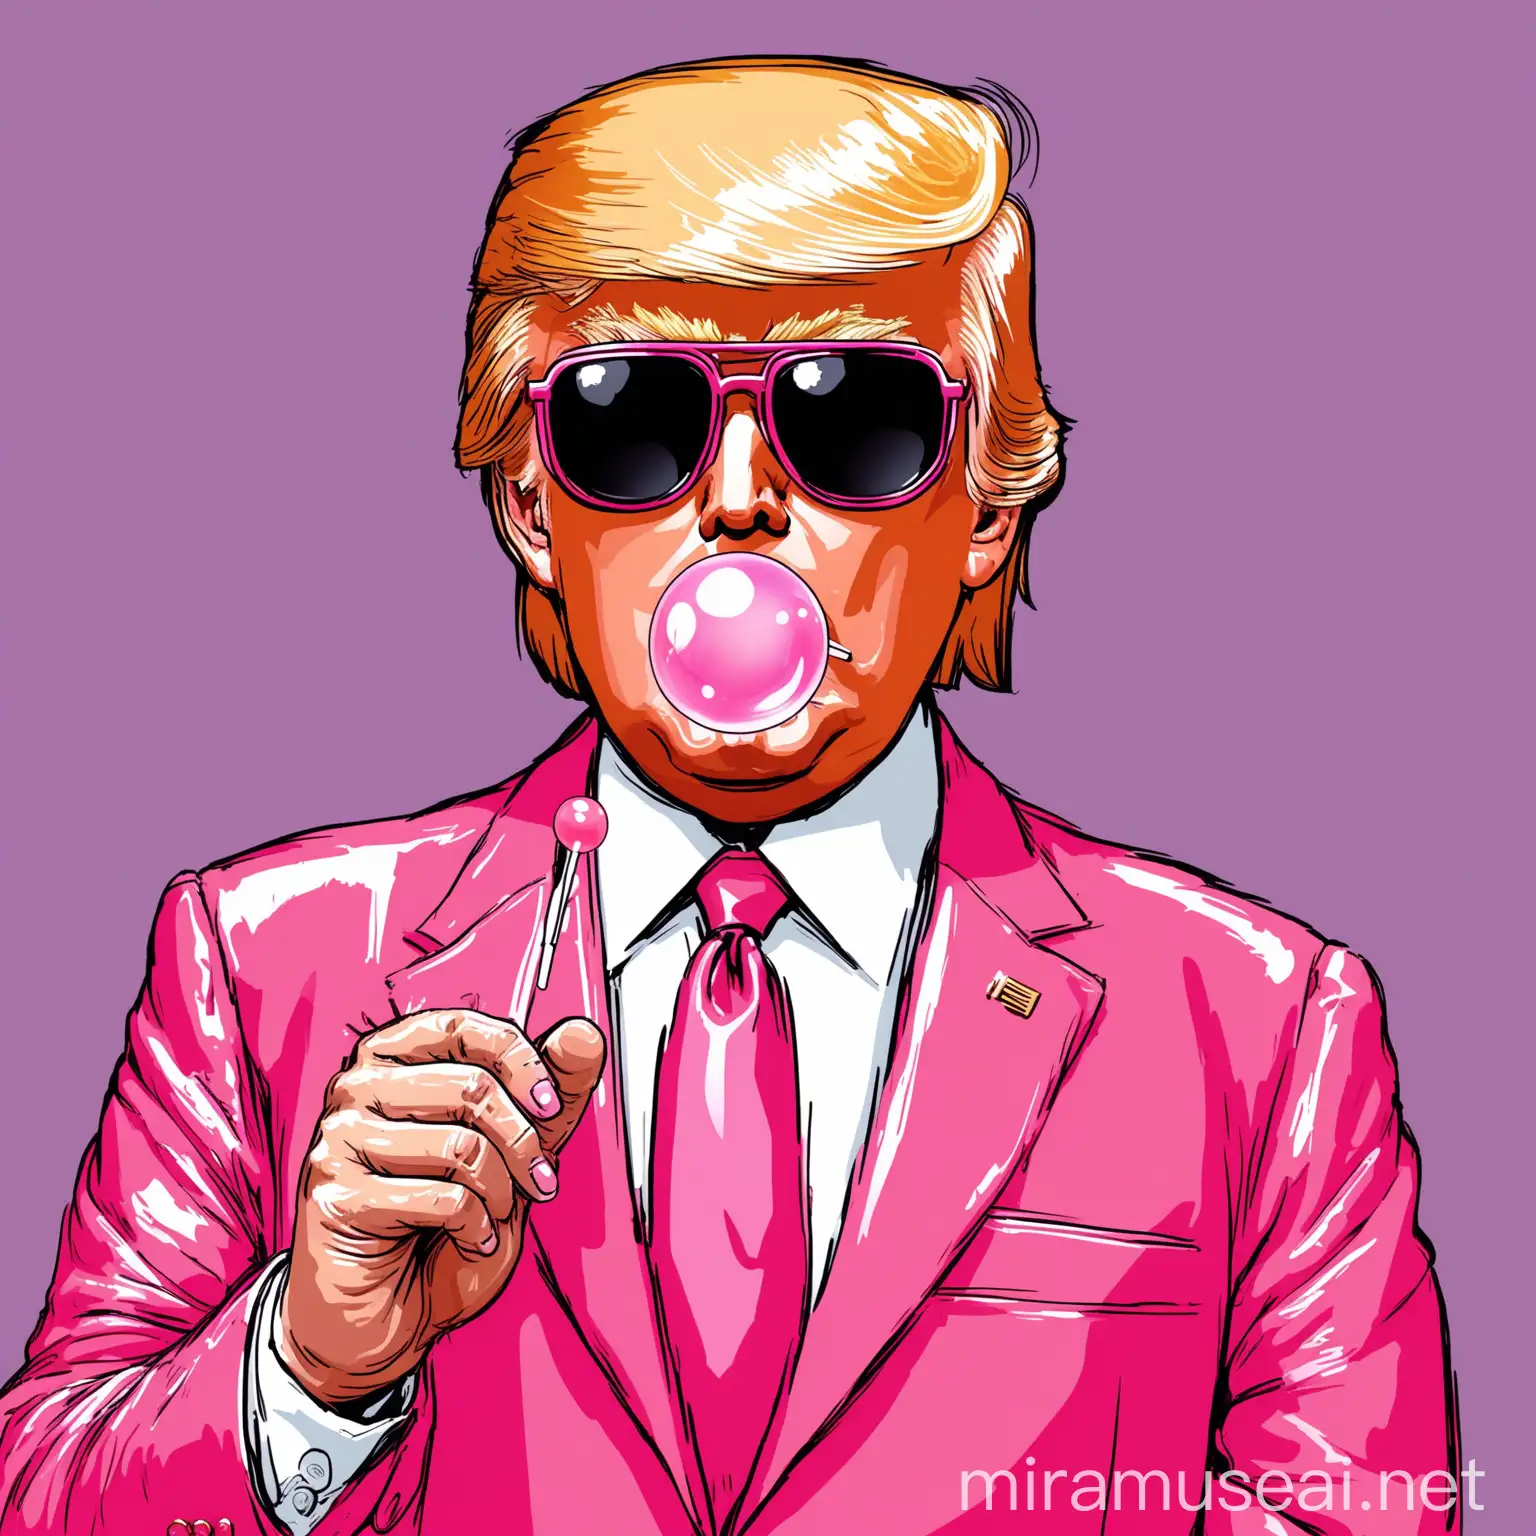 illustration of Donald Trump in pink suite, hand holding a lollipop, blowing a bubble gum, wears sunglasses
